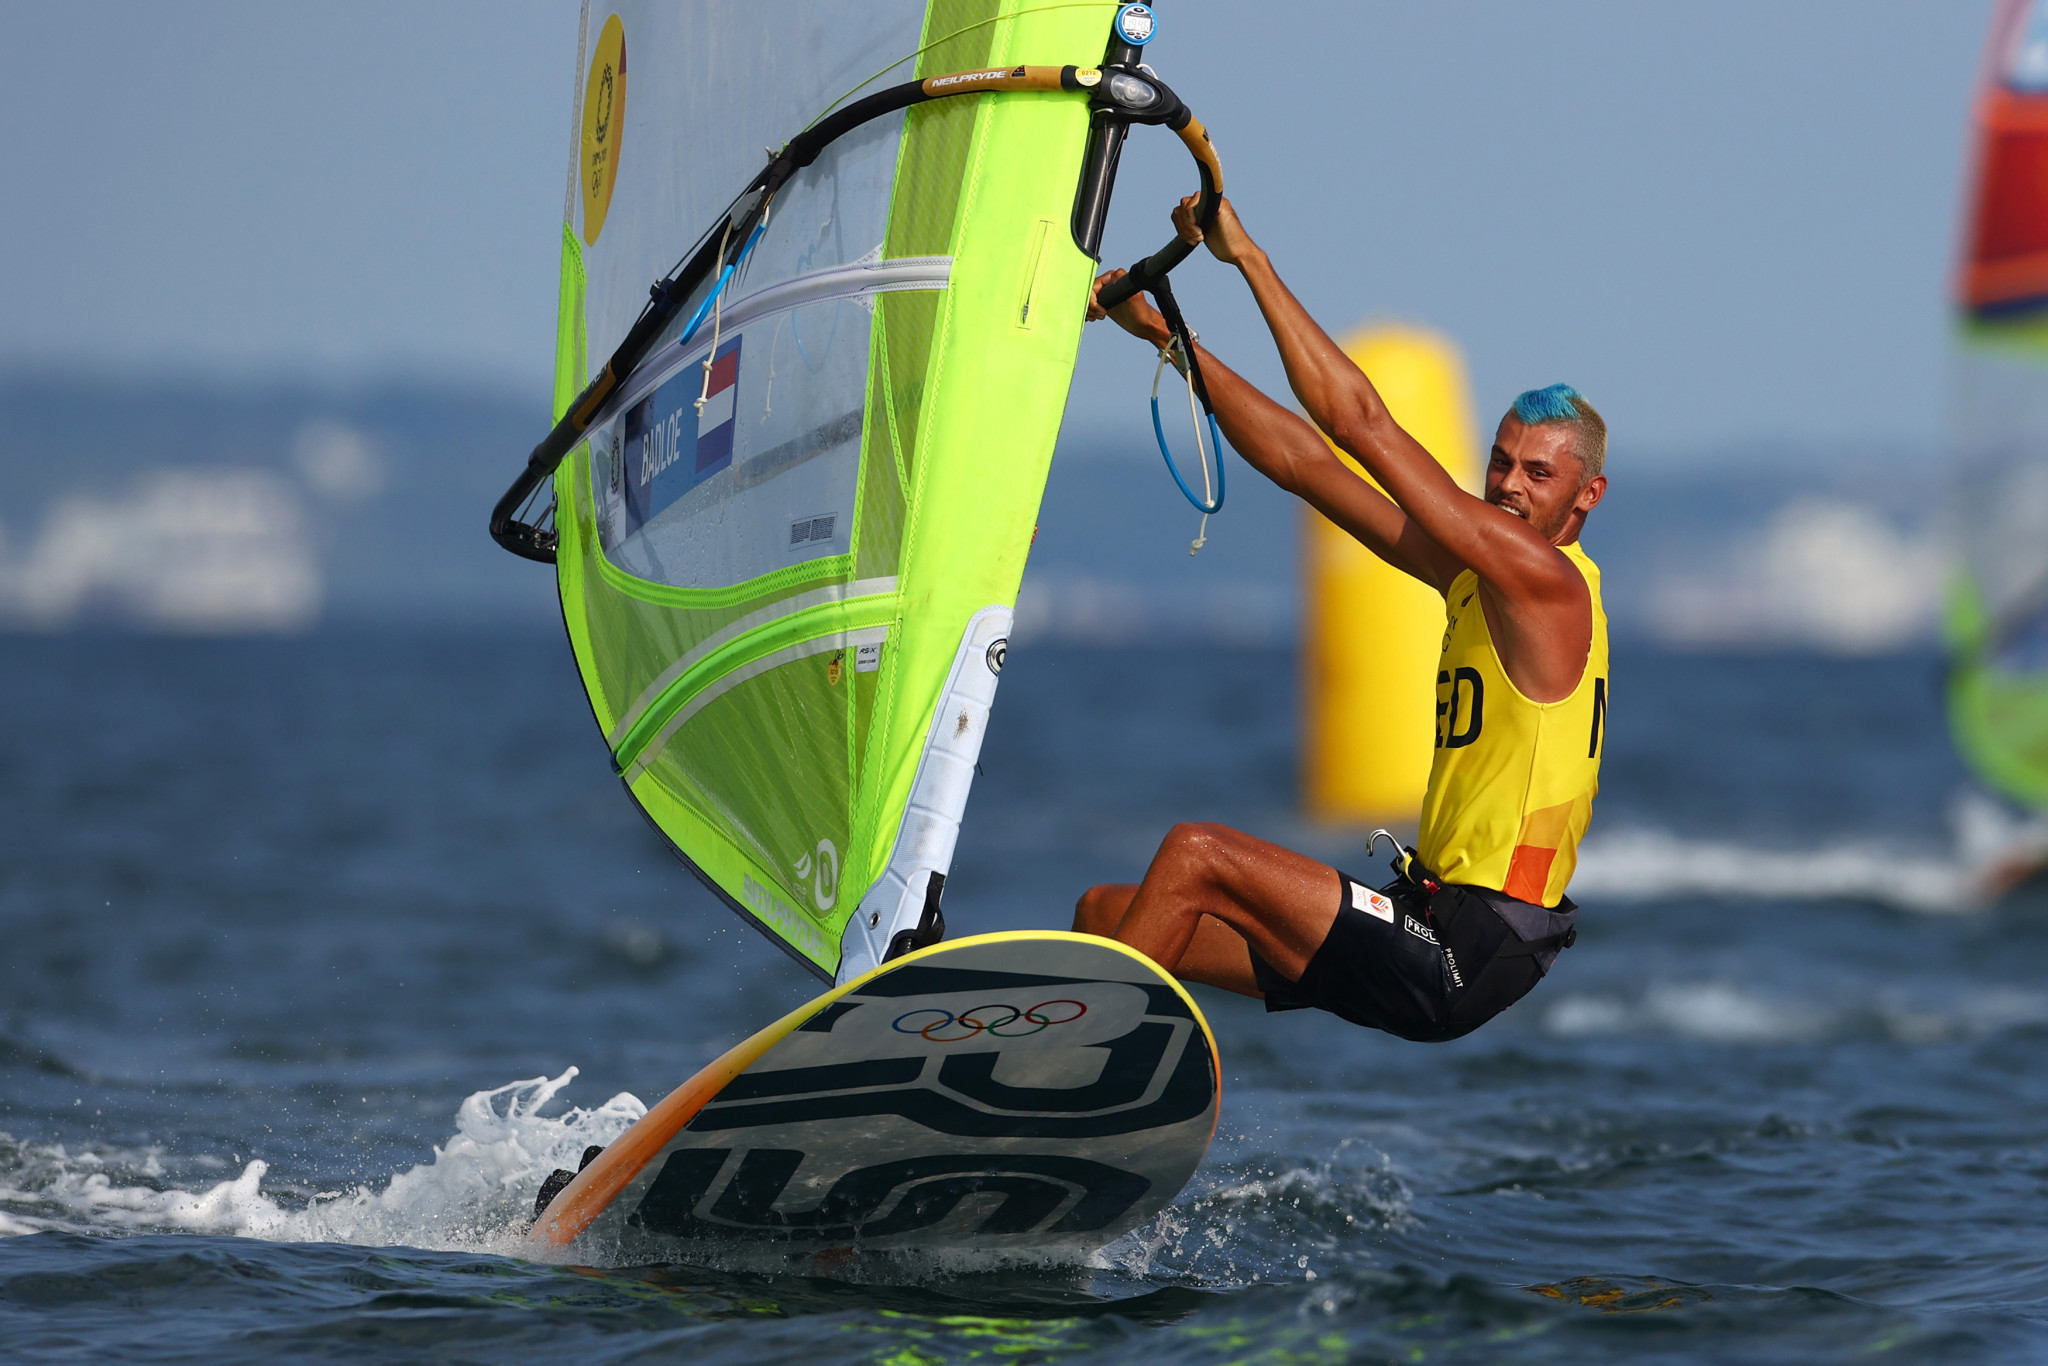 Tokyo 2020 RS:X windsurfing champion Kiran Badloe is one of the ambassadors of the NOC*NSF's ongoing partnership with hydrogen consortium Mission H2 ©Getty Images